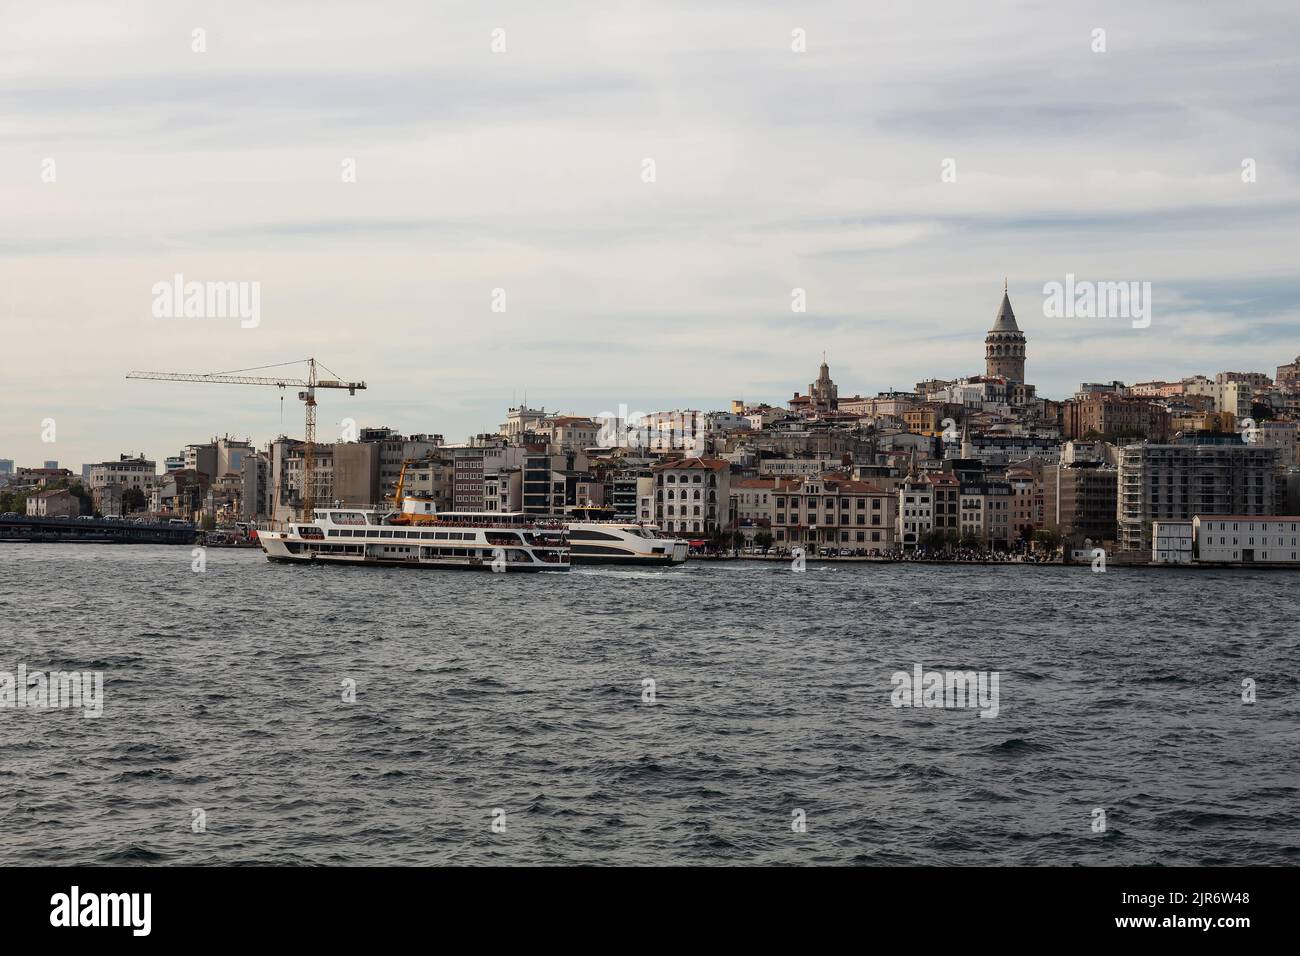 View of ferry boats on Golden Horn part of Bosphorus and Beyoglu district on European side of Istanbul. Galata tower is also in the view. Beautiful sc Stock Photo